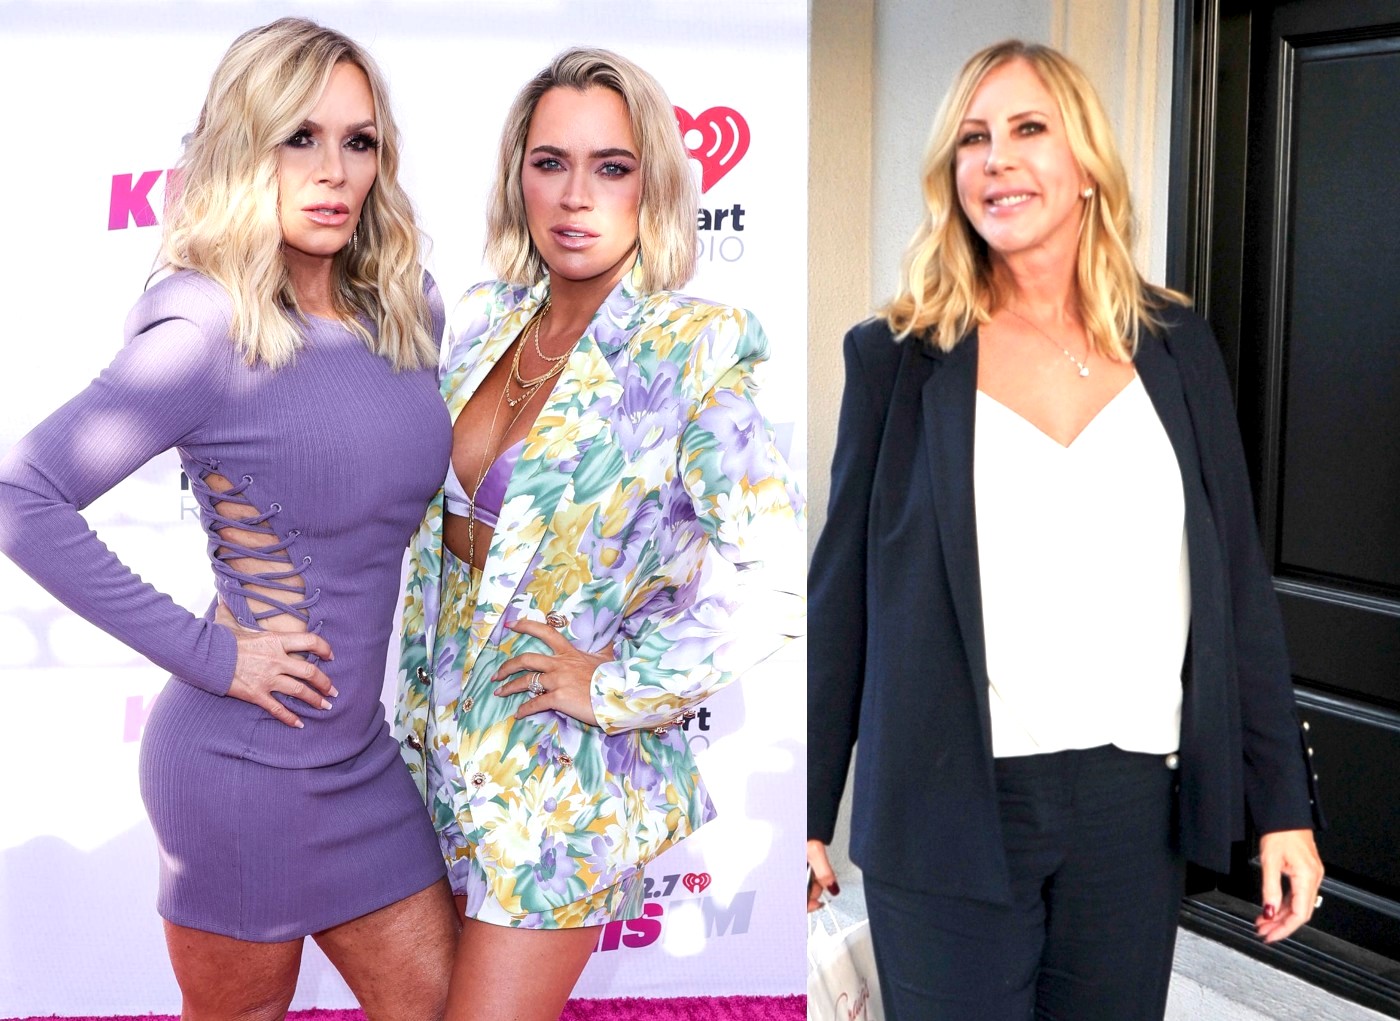 'RHOC' Tamra Judge Suggests Vicki Gunvalson Tried to Get Teddi Mellencamp Fired From Podcast and Called Their Boss as Teddi Accuses Her of "Low Blow," Plus RHOBH Live Viewing